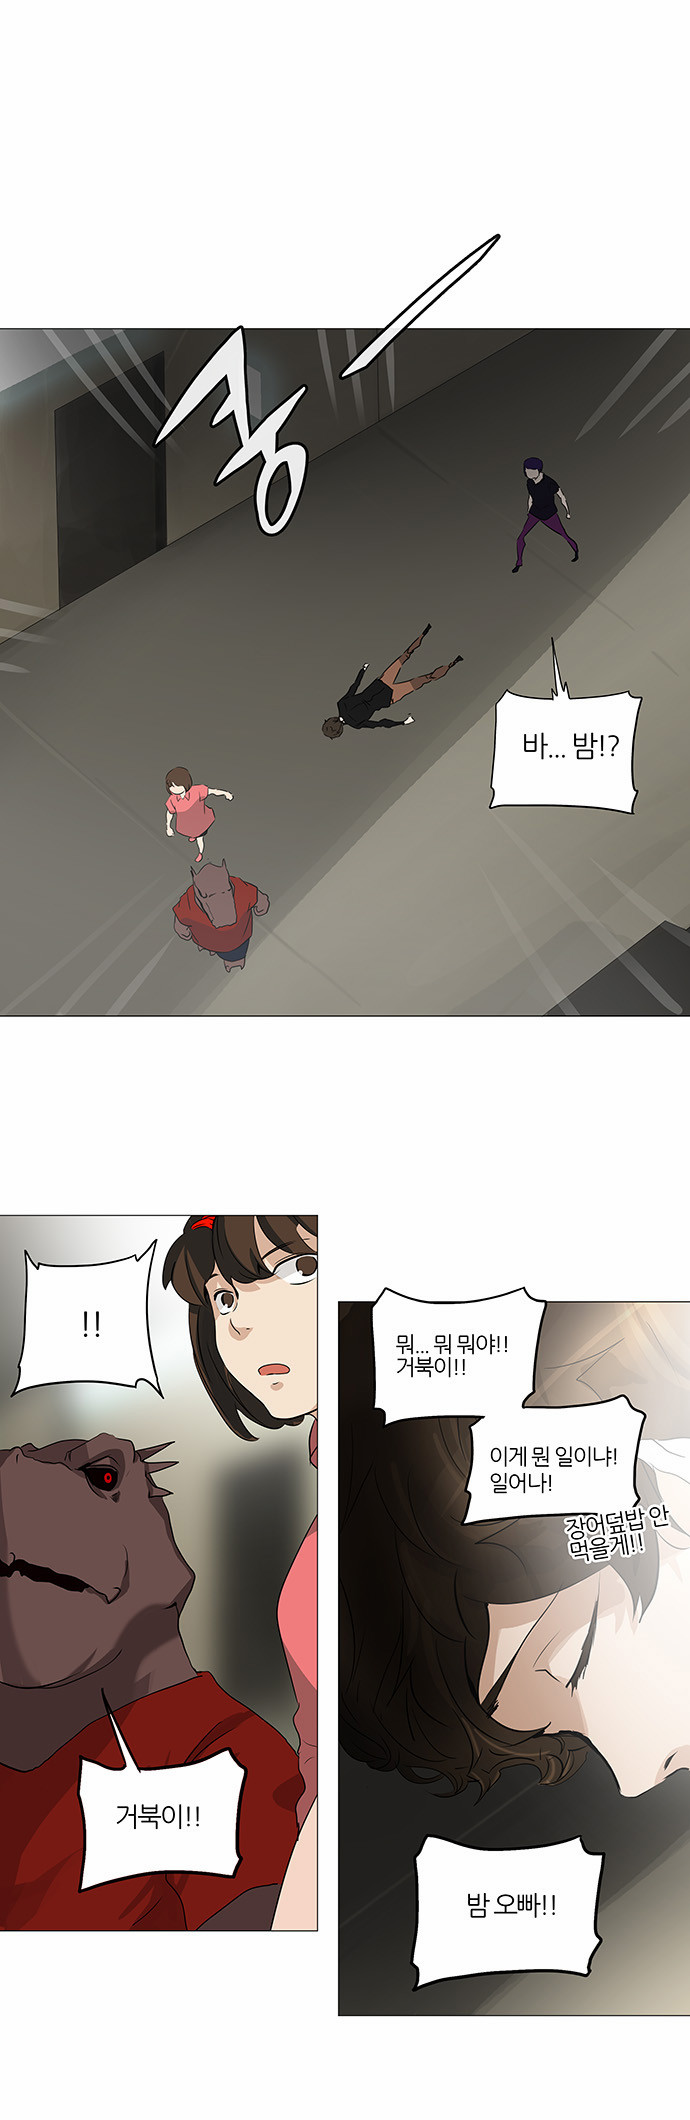 Tower of God - Chapter 237 - Page 1